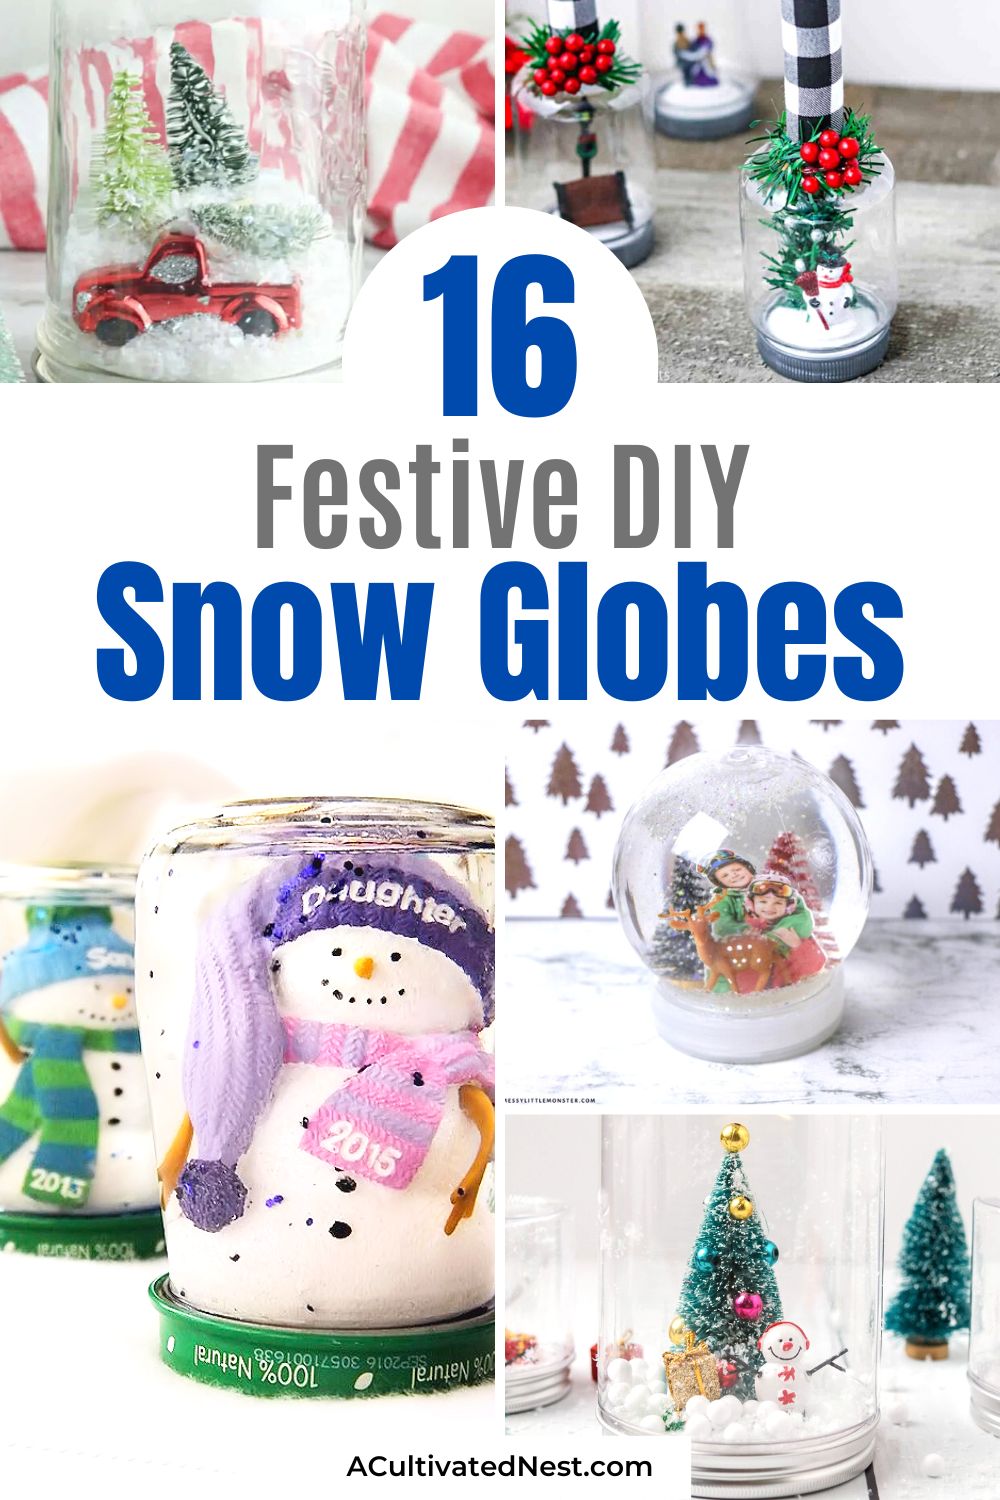 16 Festive DIY Snow Globes- Shake up the holidays with creativity and craft these festive DIY snow globes. From whimsical scenes to personalized treasures, these charming globes are perfect for adding a touch of winter charm to your space. Get ready to make your own snowy masterpiece! | #CraftingIdeas #HandmadeGifts #craftIdeas #diyProjects #ACultivatedNest